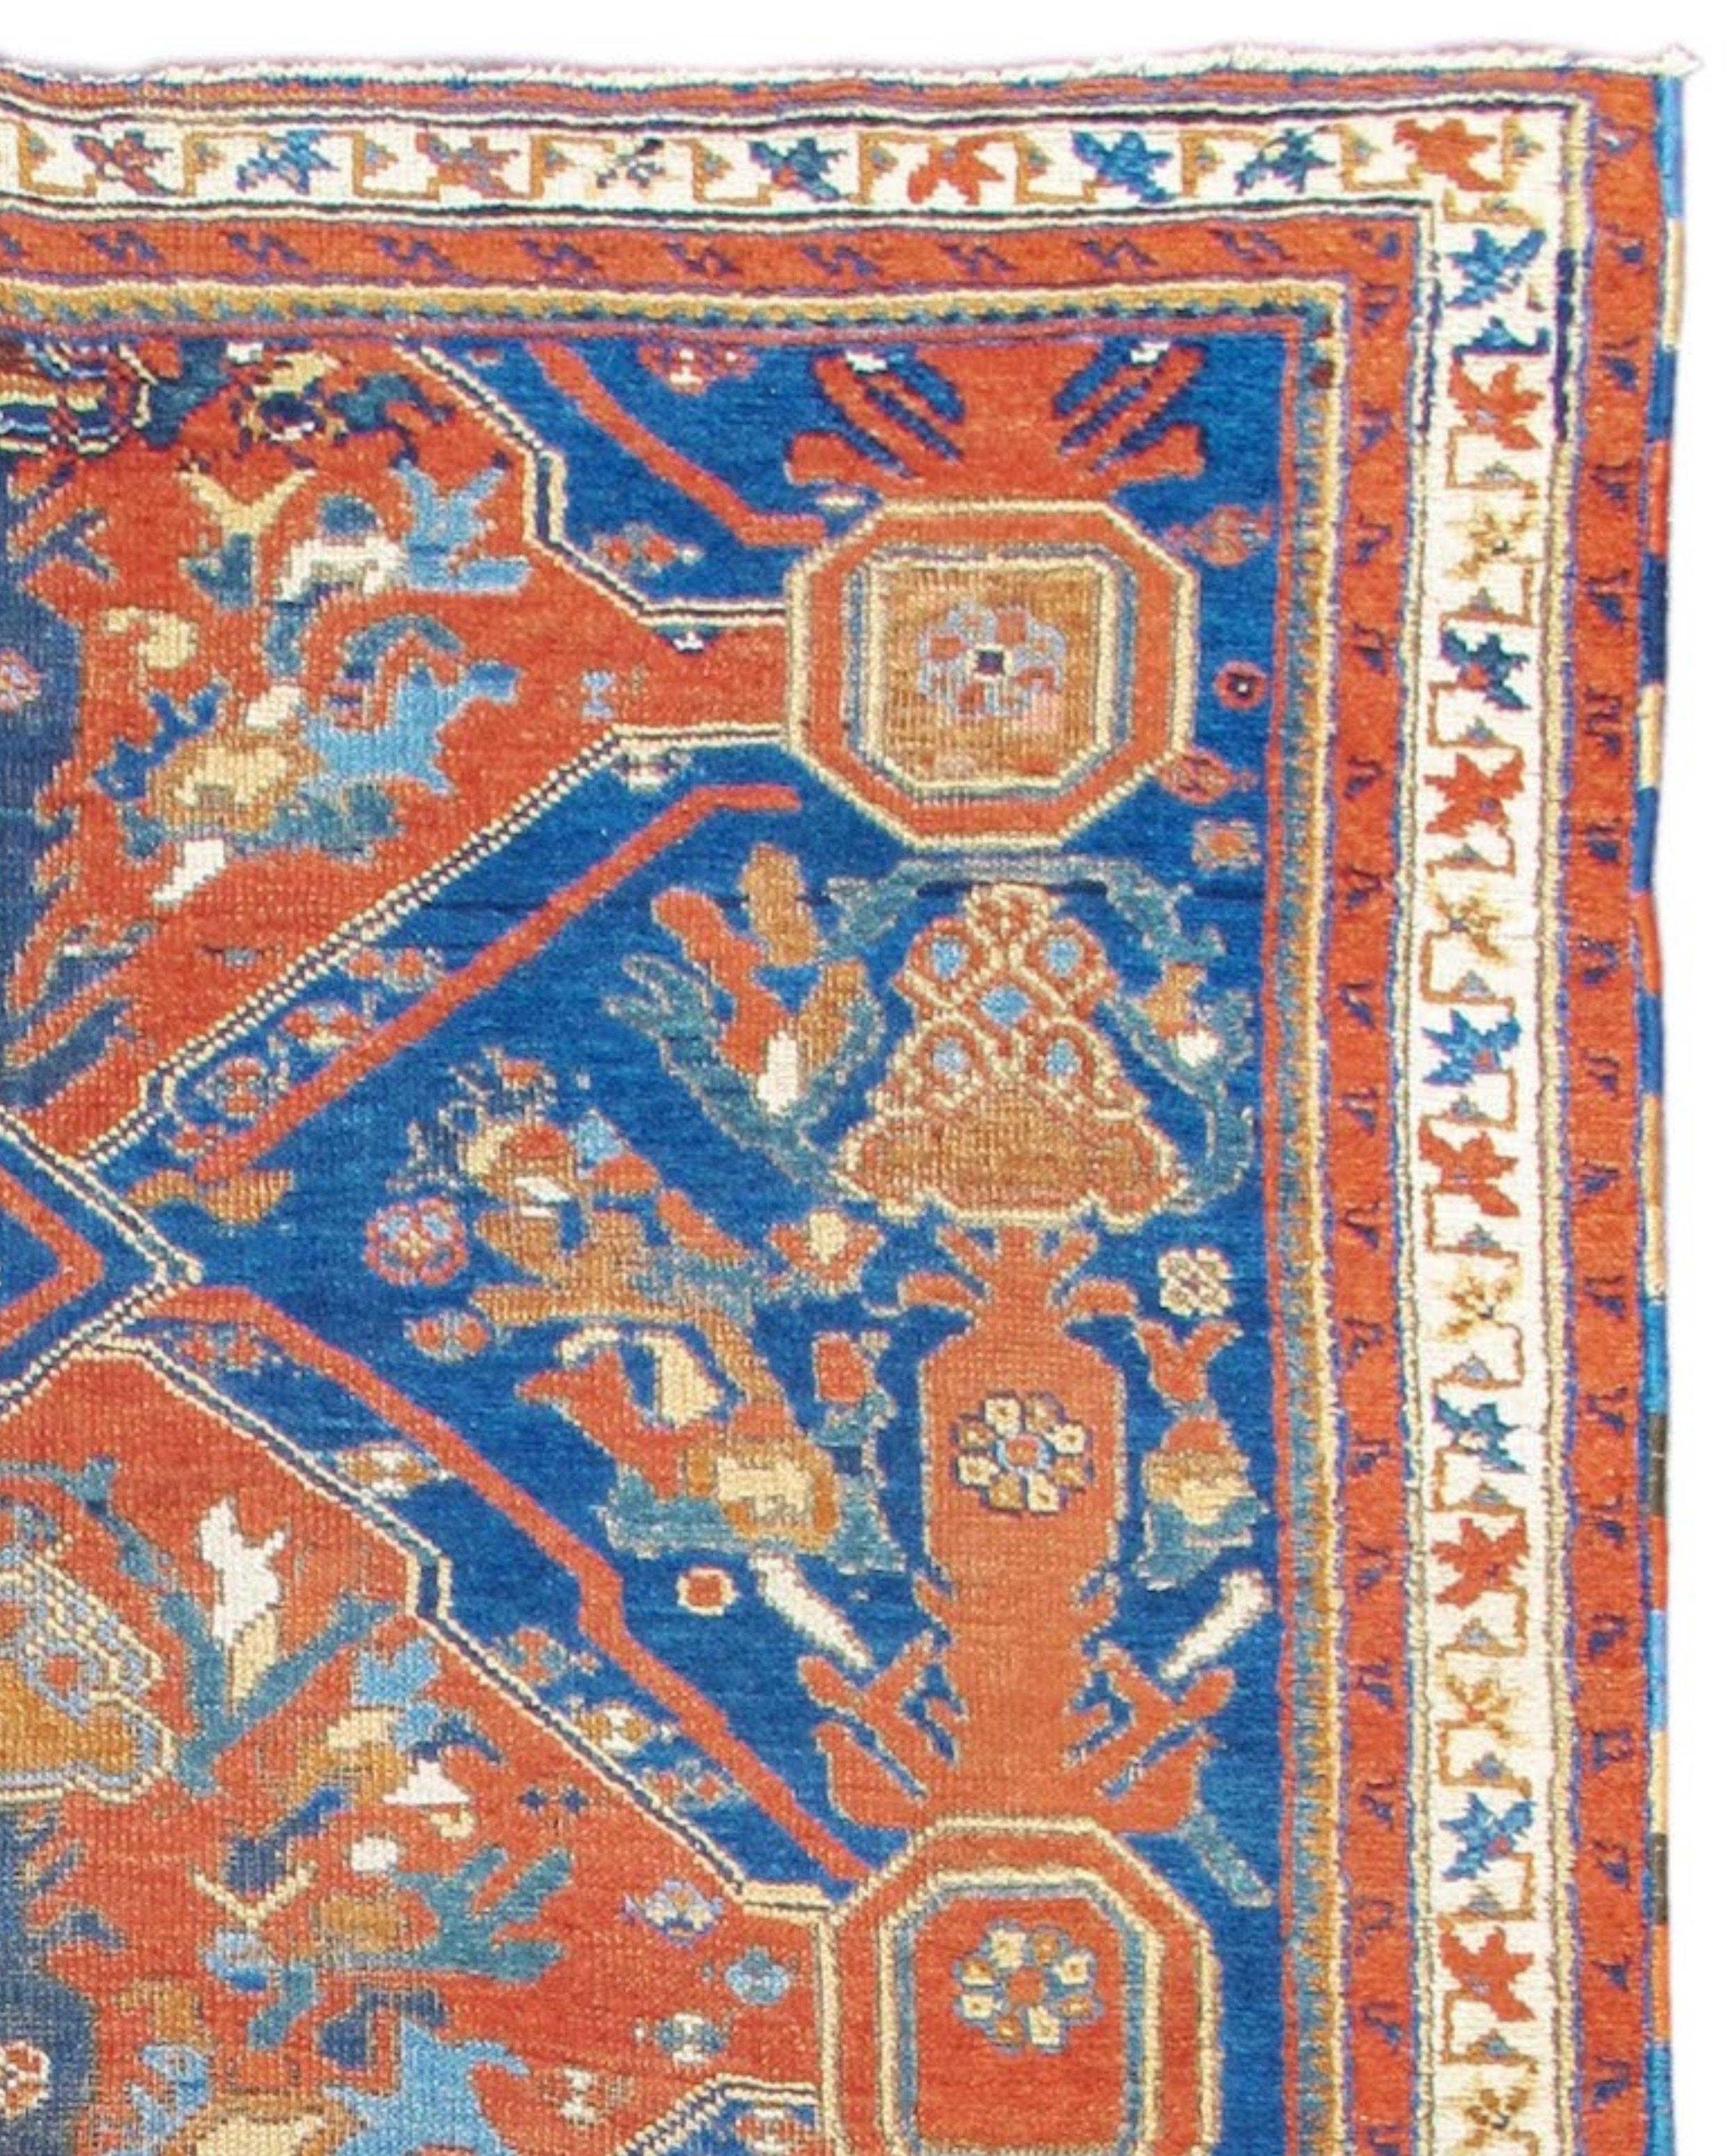 Antique Persian Afshar Rug, Early 20th Century

The Afshar weaving tradition of south Persia offers a fascinating tribal interpretation of more formal Persian workshop weaving. The Afshar in the 19th century were nomadic pastoralists who grew